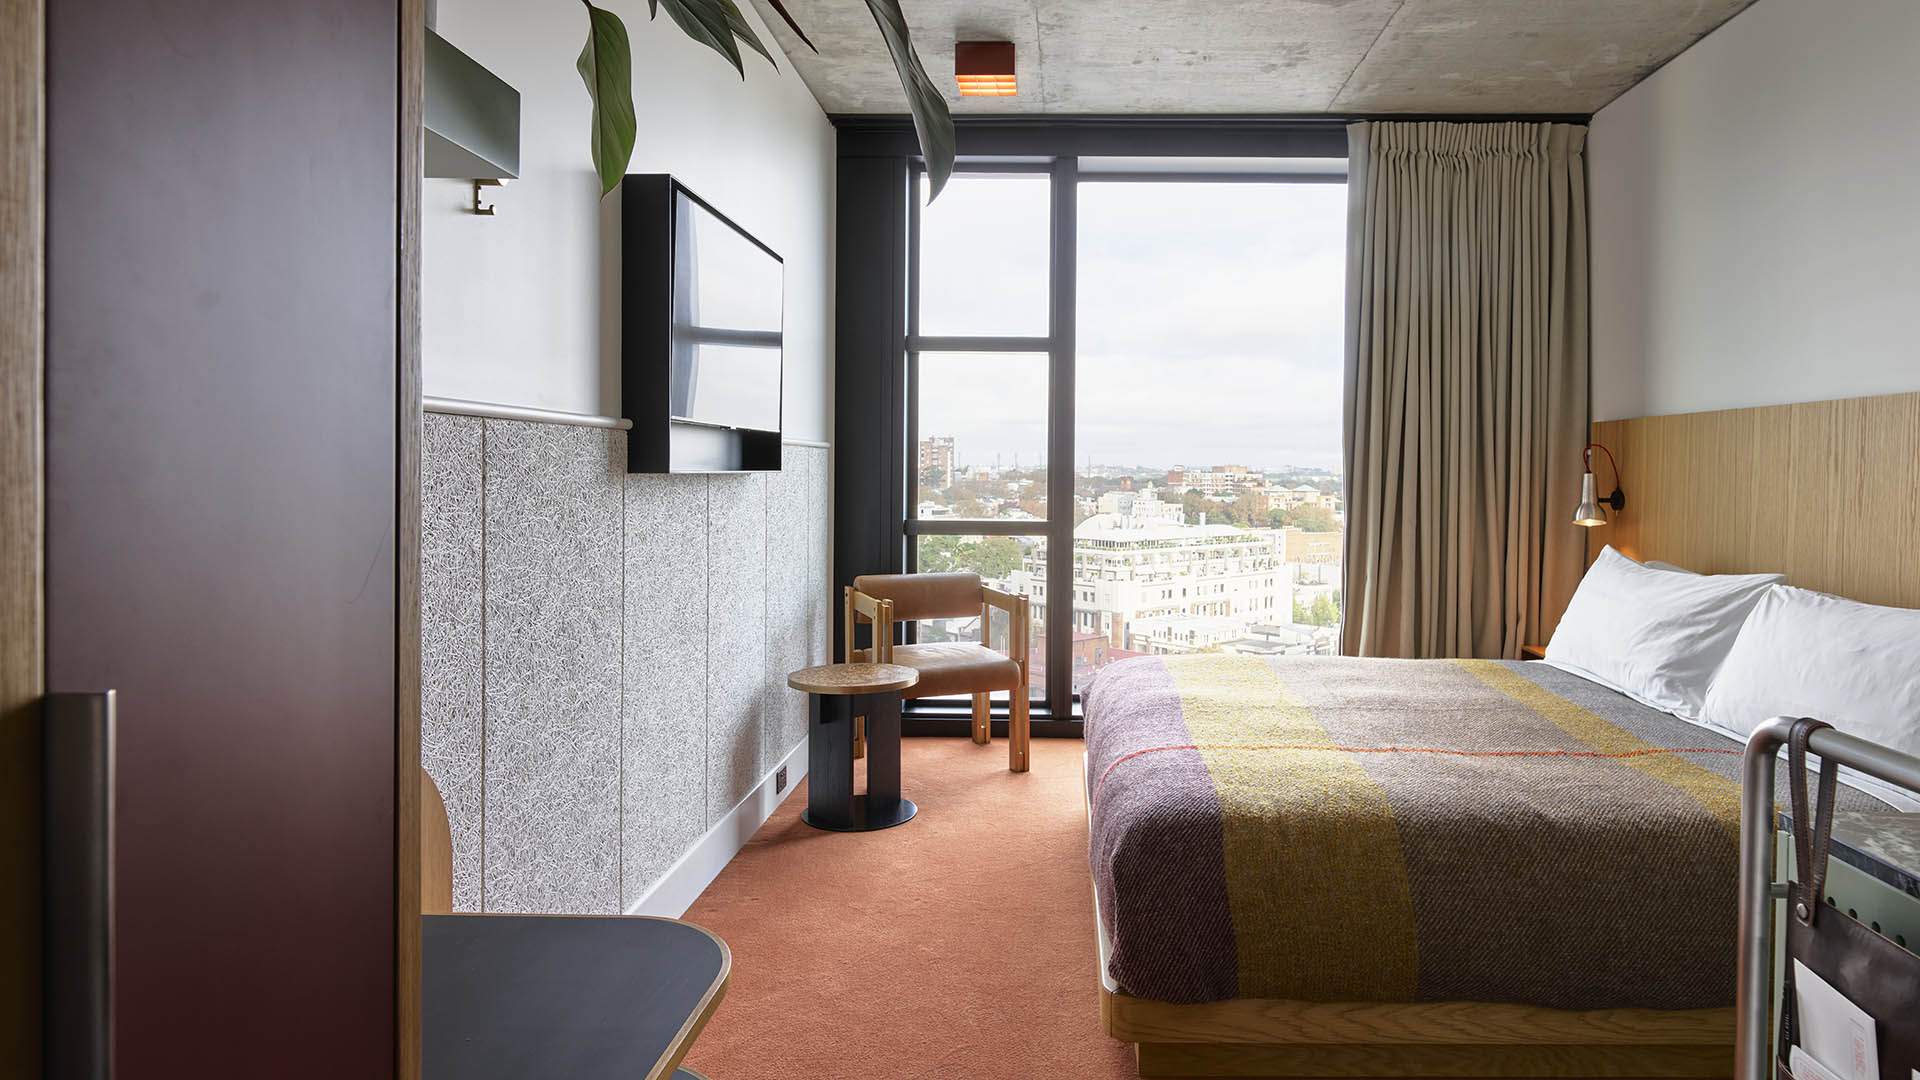 The Southern Hemisphere's First-Ever Super-Sleek Ace Hotel Has Finally Opened in Sydney